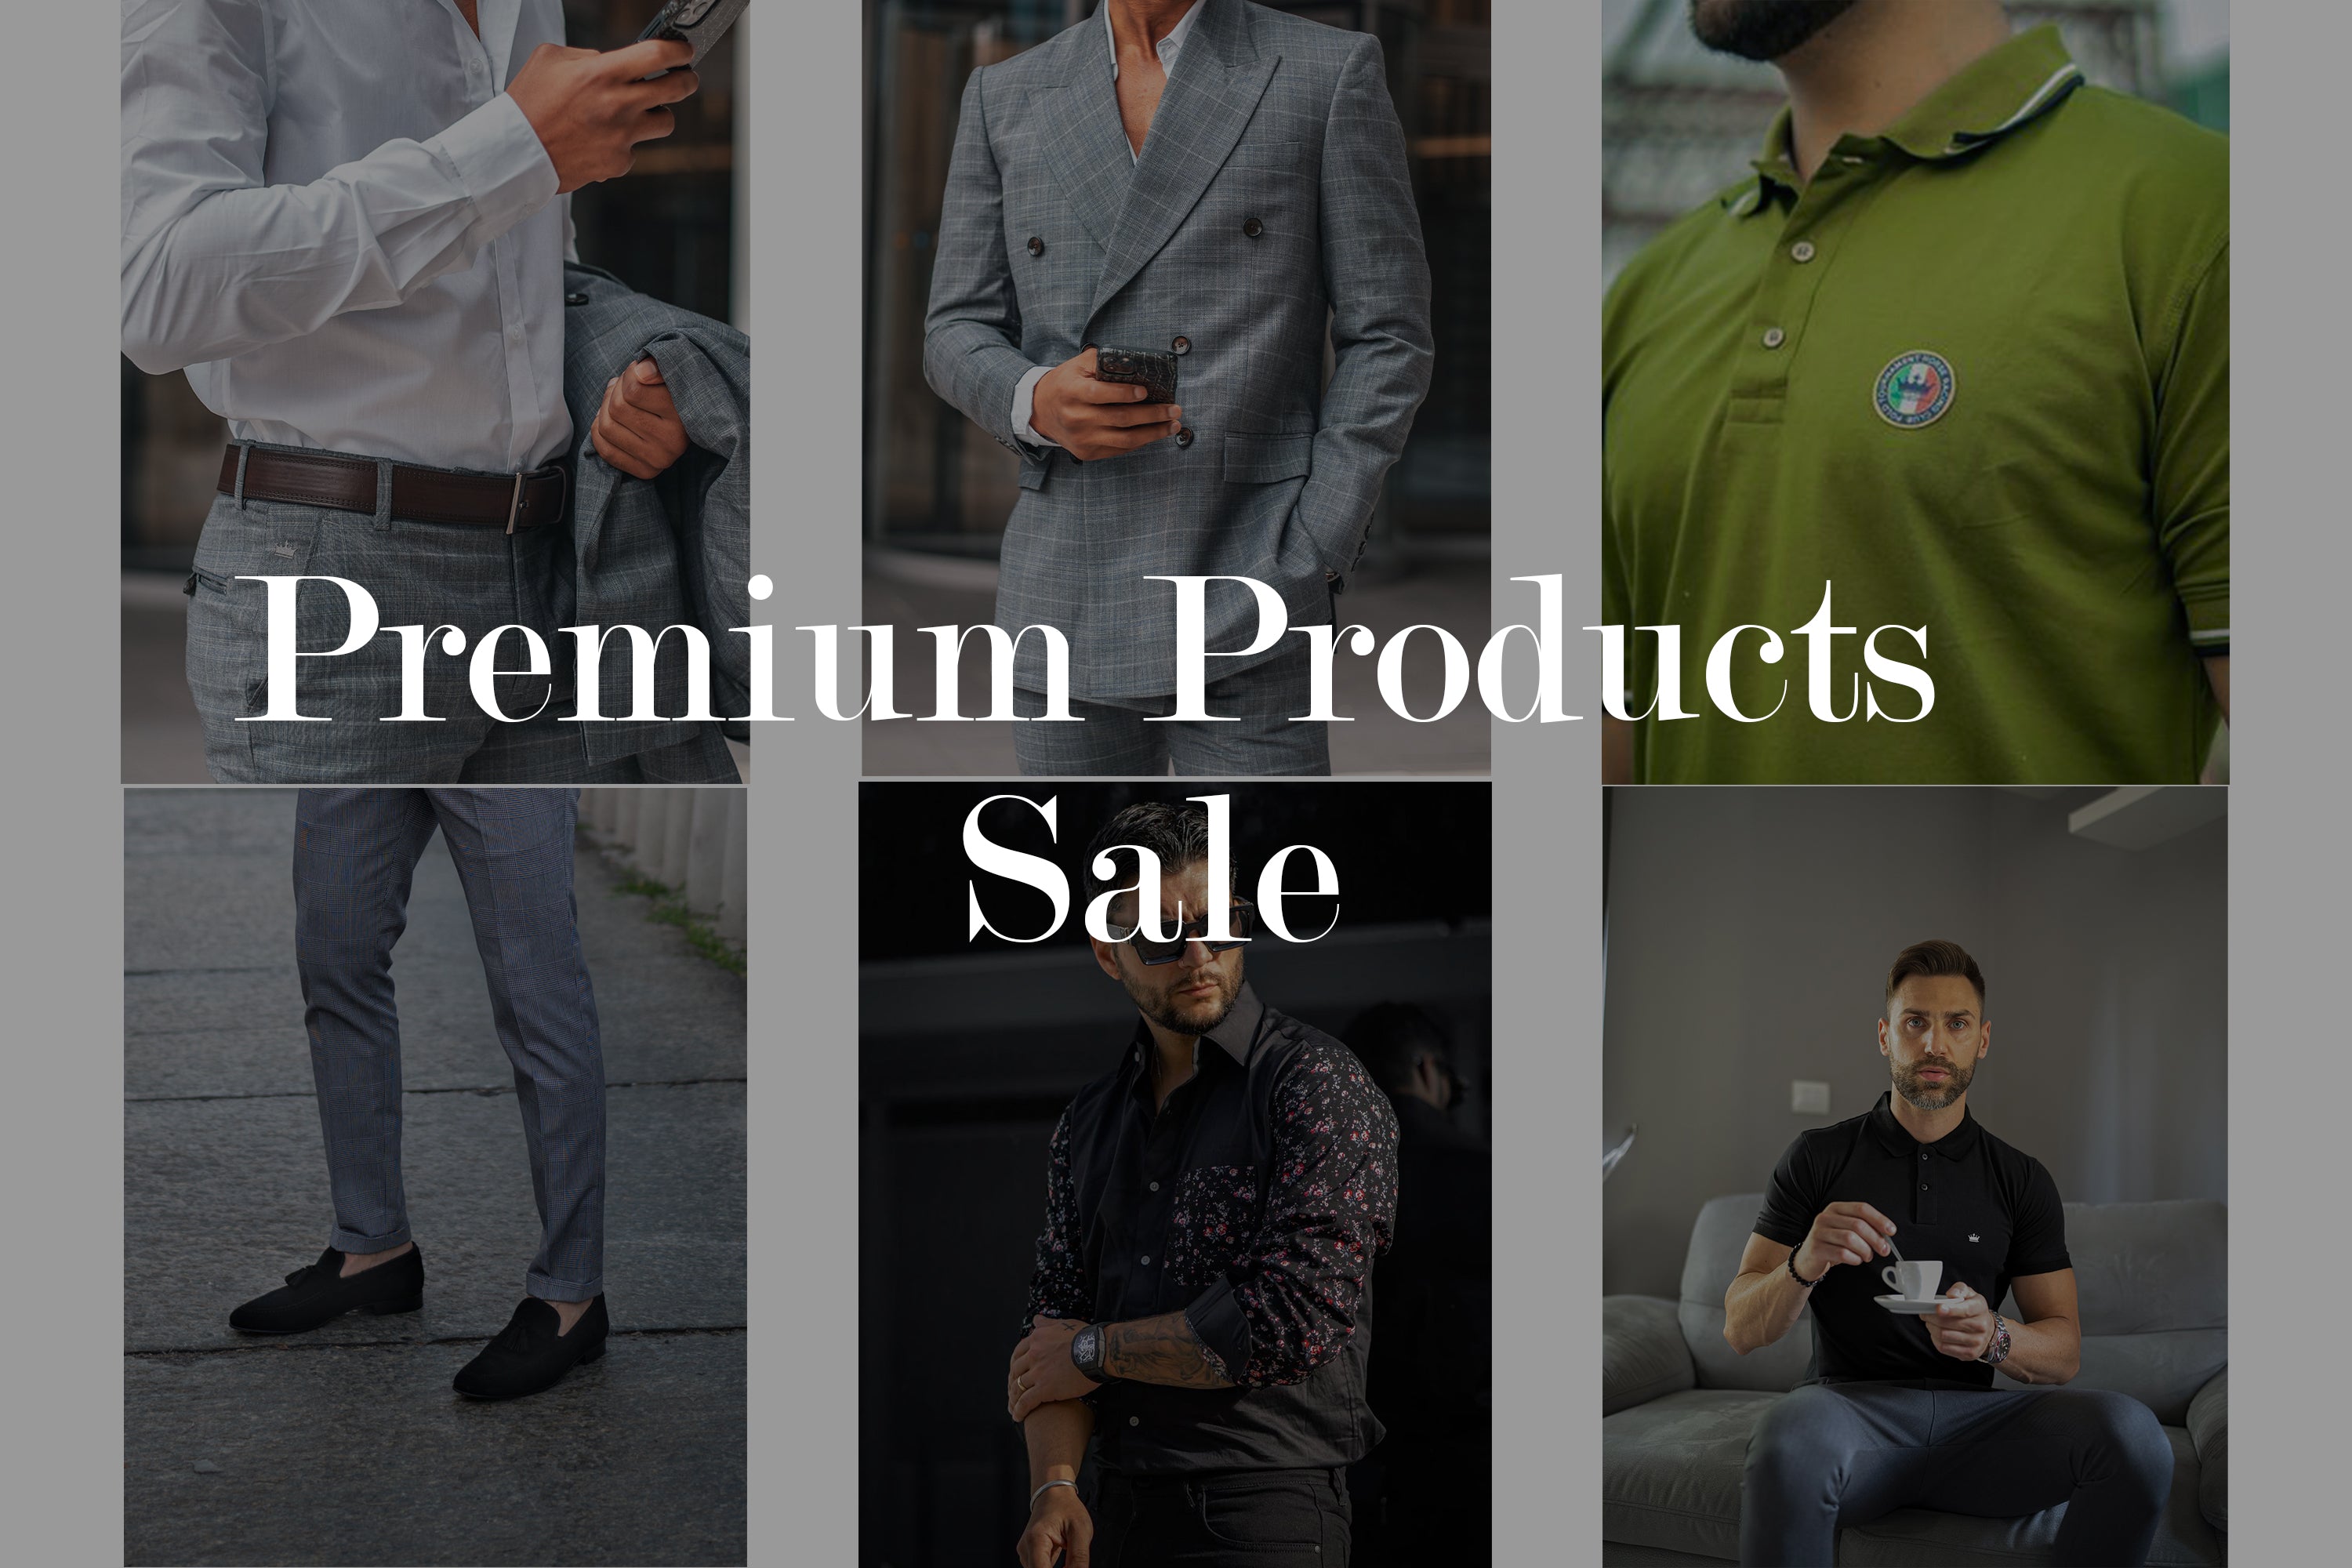 Premium Products For Sale